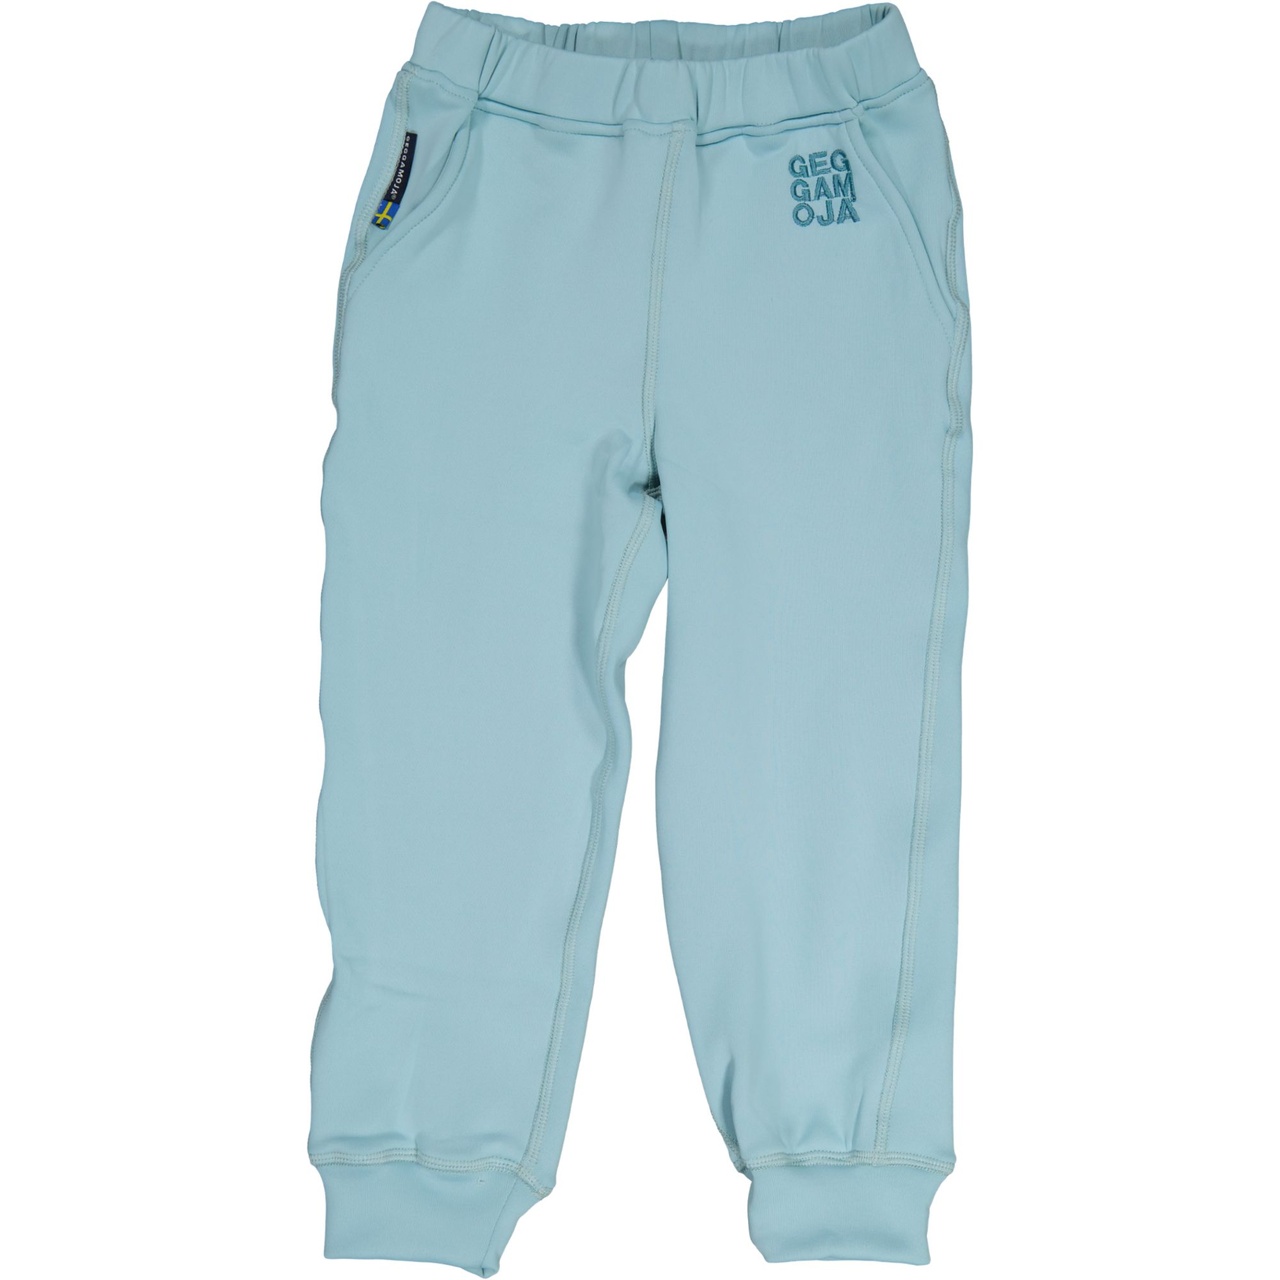 Stretch pant Turquoise 134/140